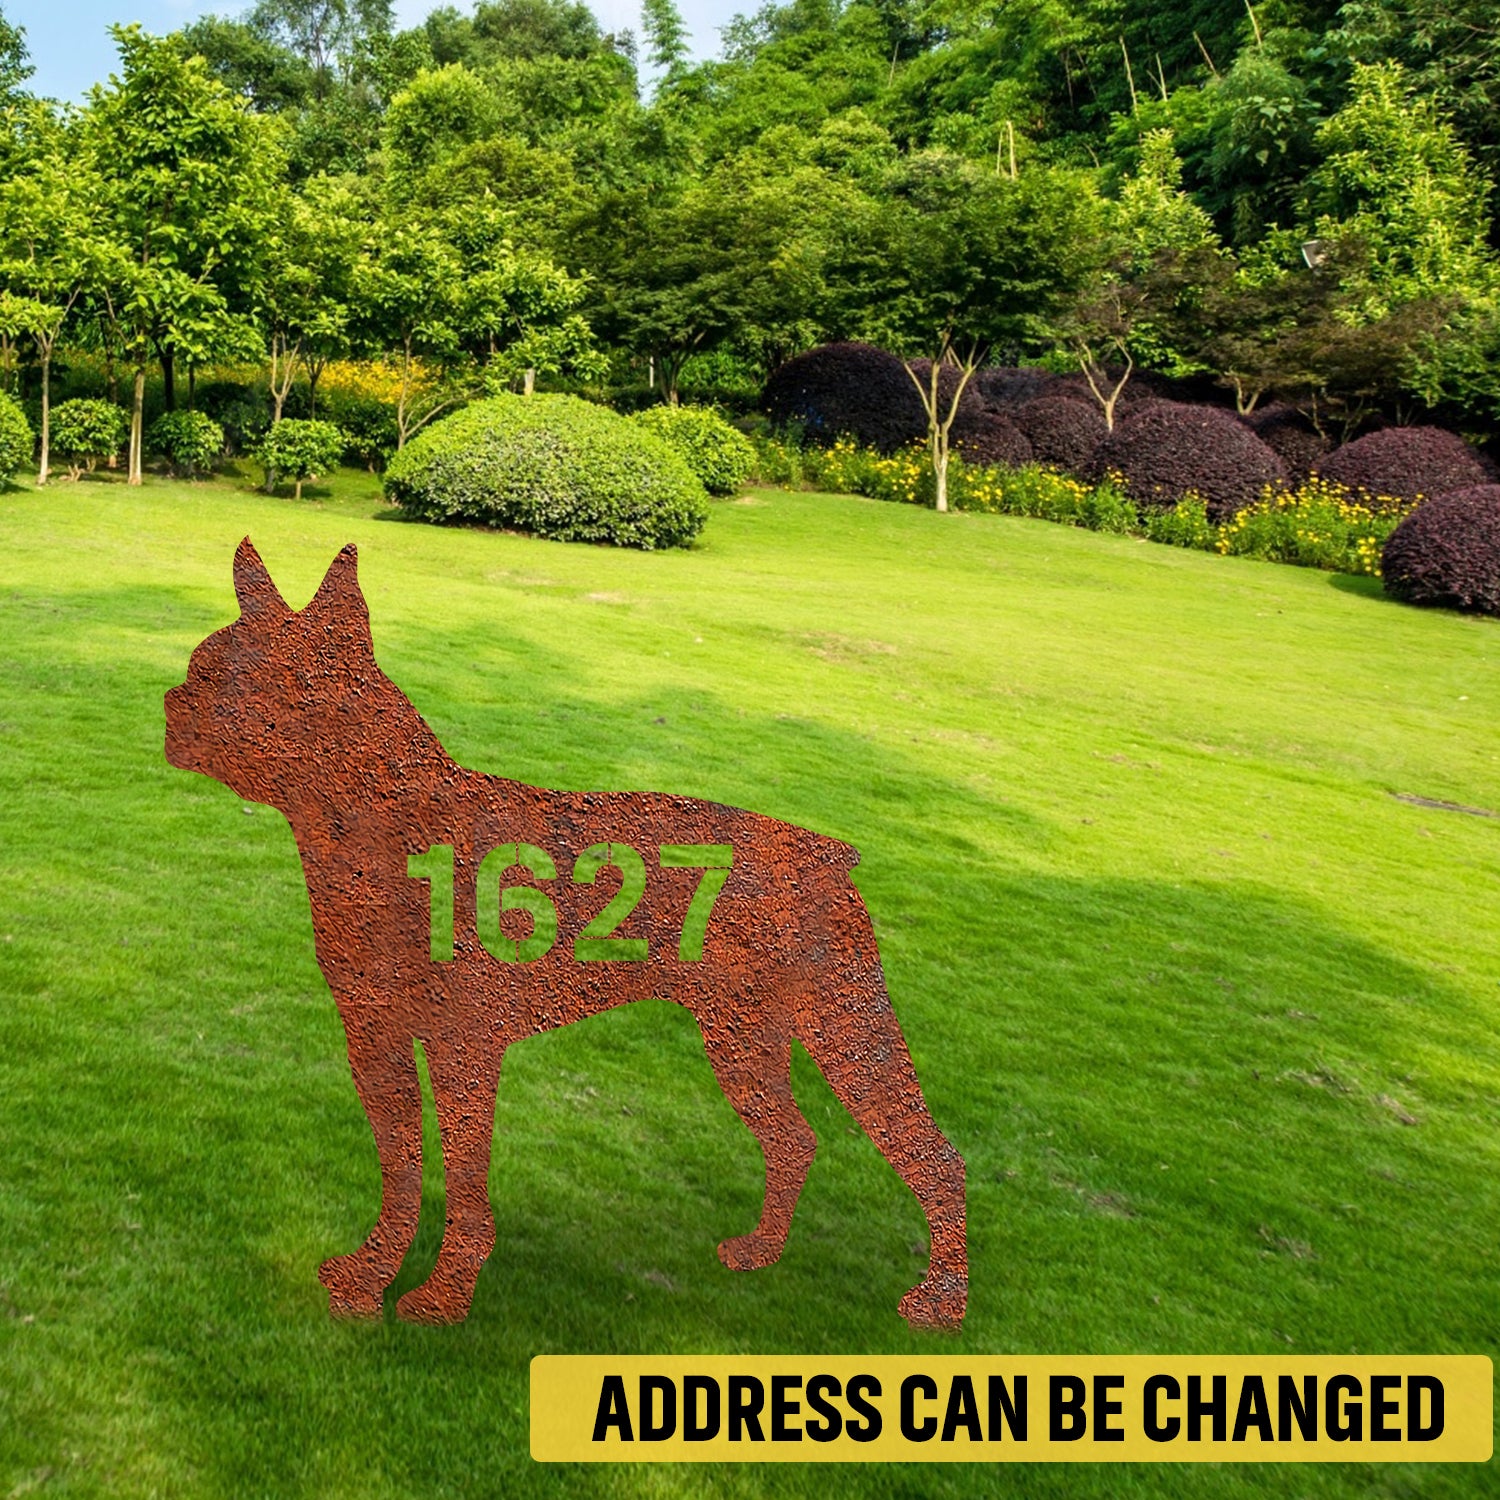 Personalized Address Number Boston Terrier Dog Rusted Metal Garden Decor, Boston Terrier Yard Stake